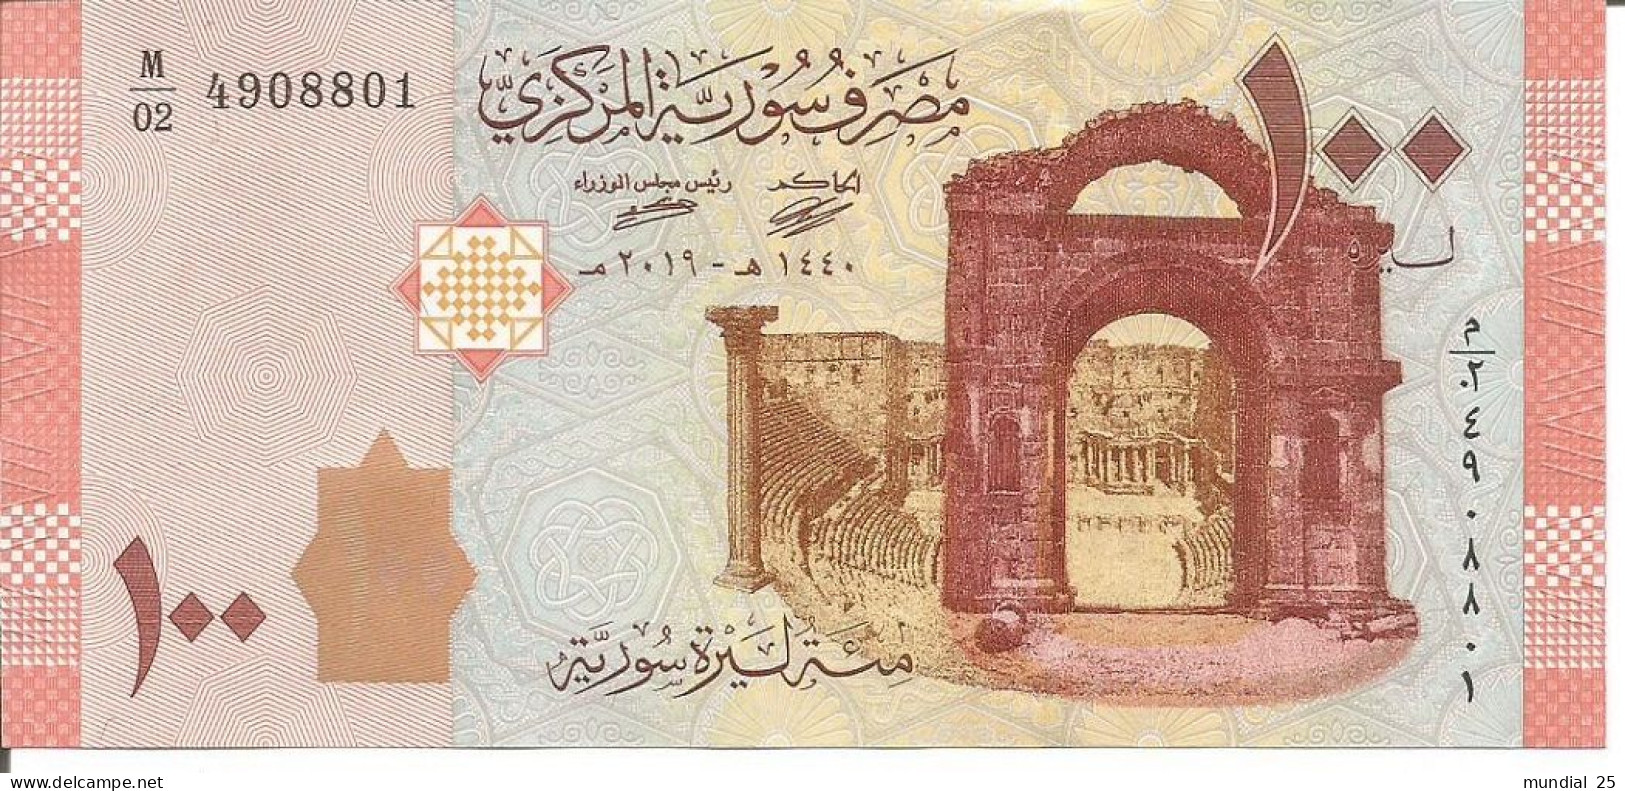 2 SYRIA NOTES 100 POUNDS 2019 - Syrie